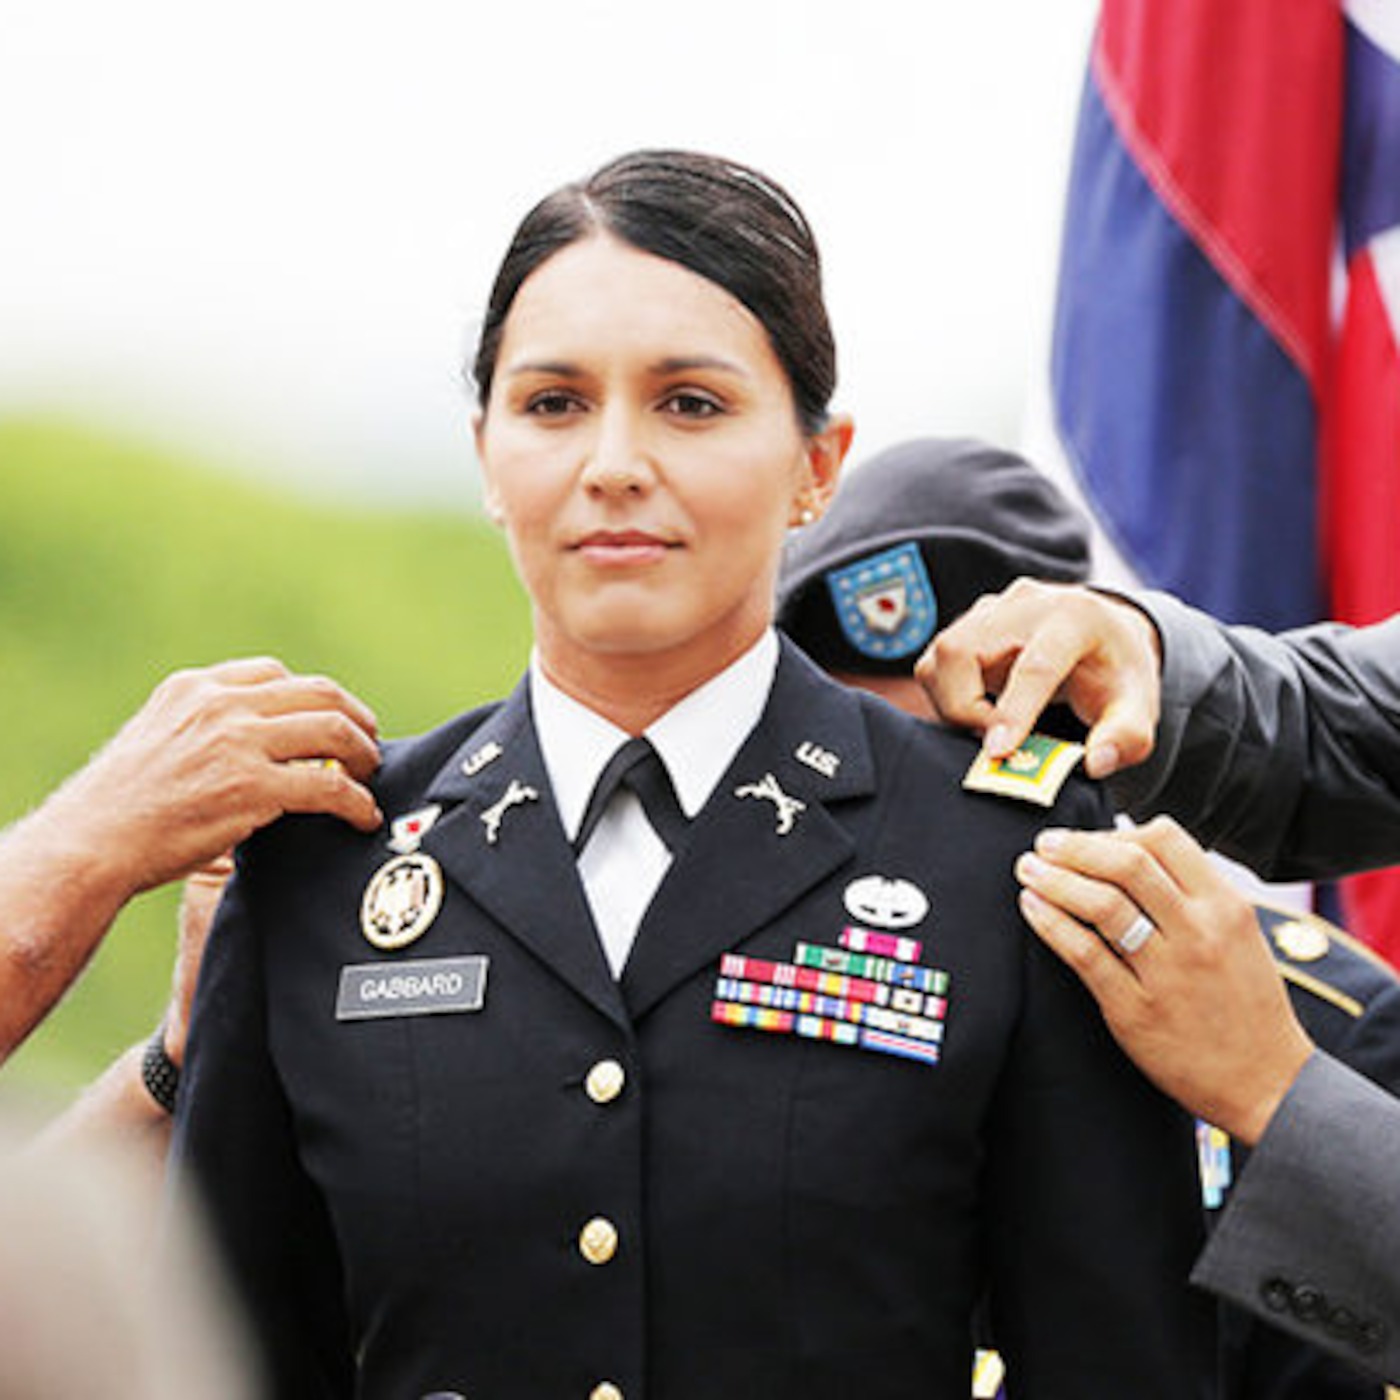 Tulsi 2020: Is She the Real Deal, or Another Obama?